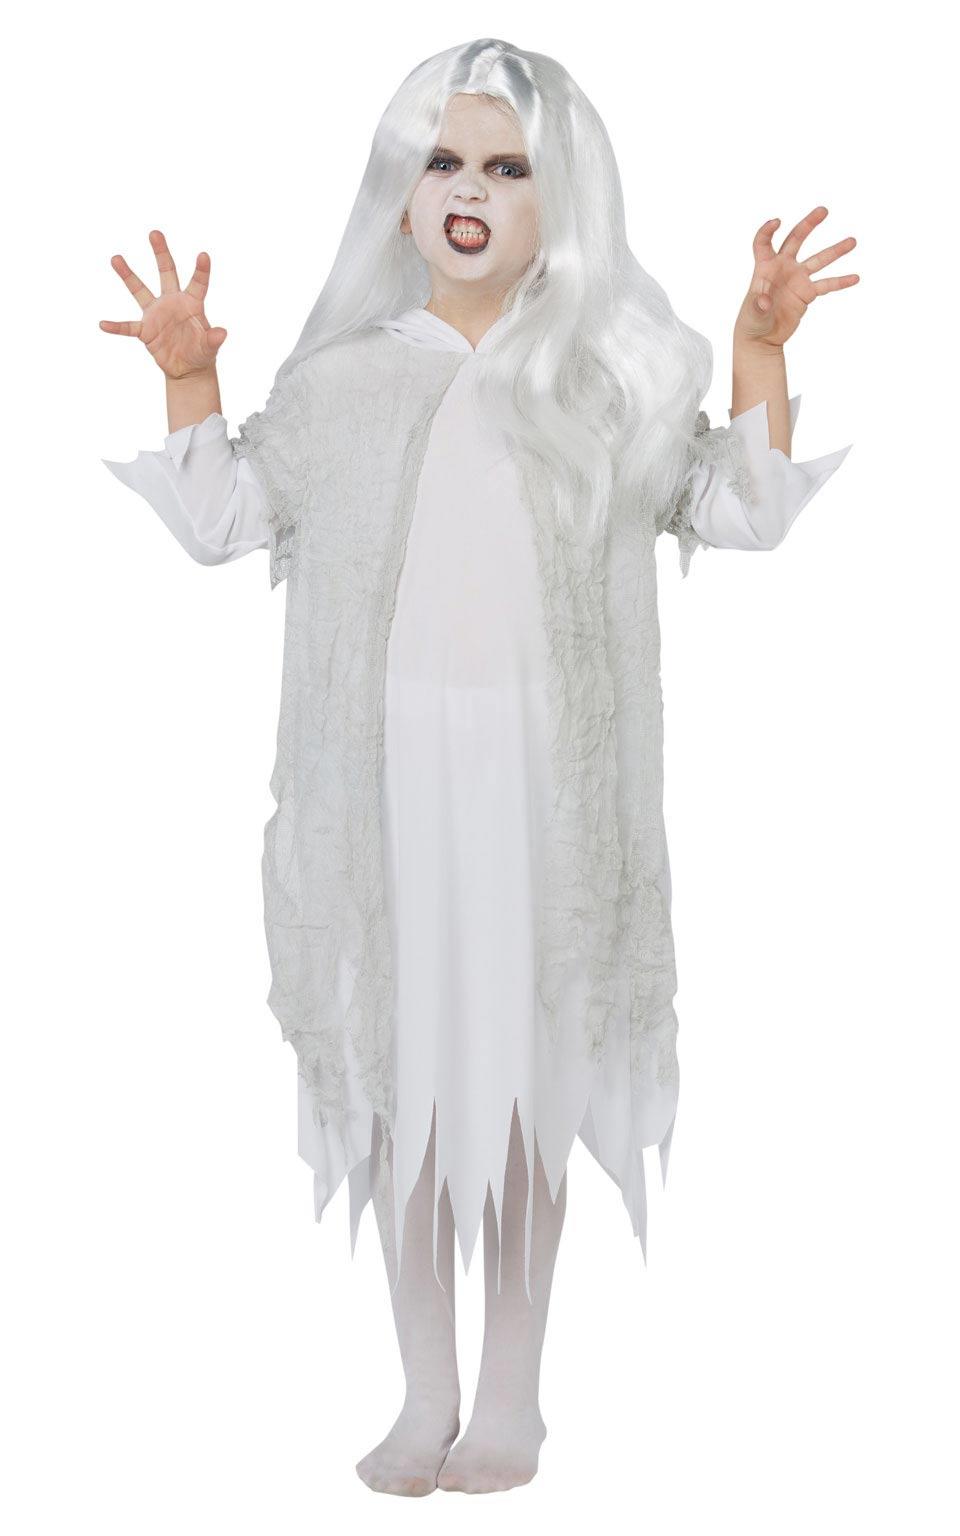 Children's Ghostly Spirit Halloween Fancy Dress Costume by Rubies 630700 available here at Karnival Costumes online party shop